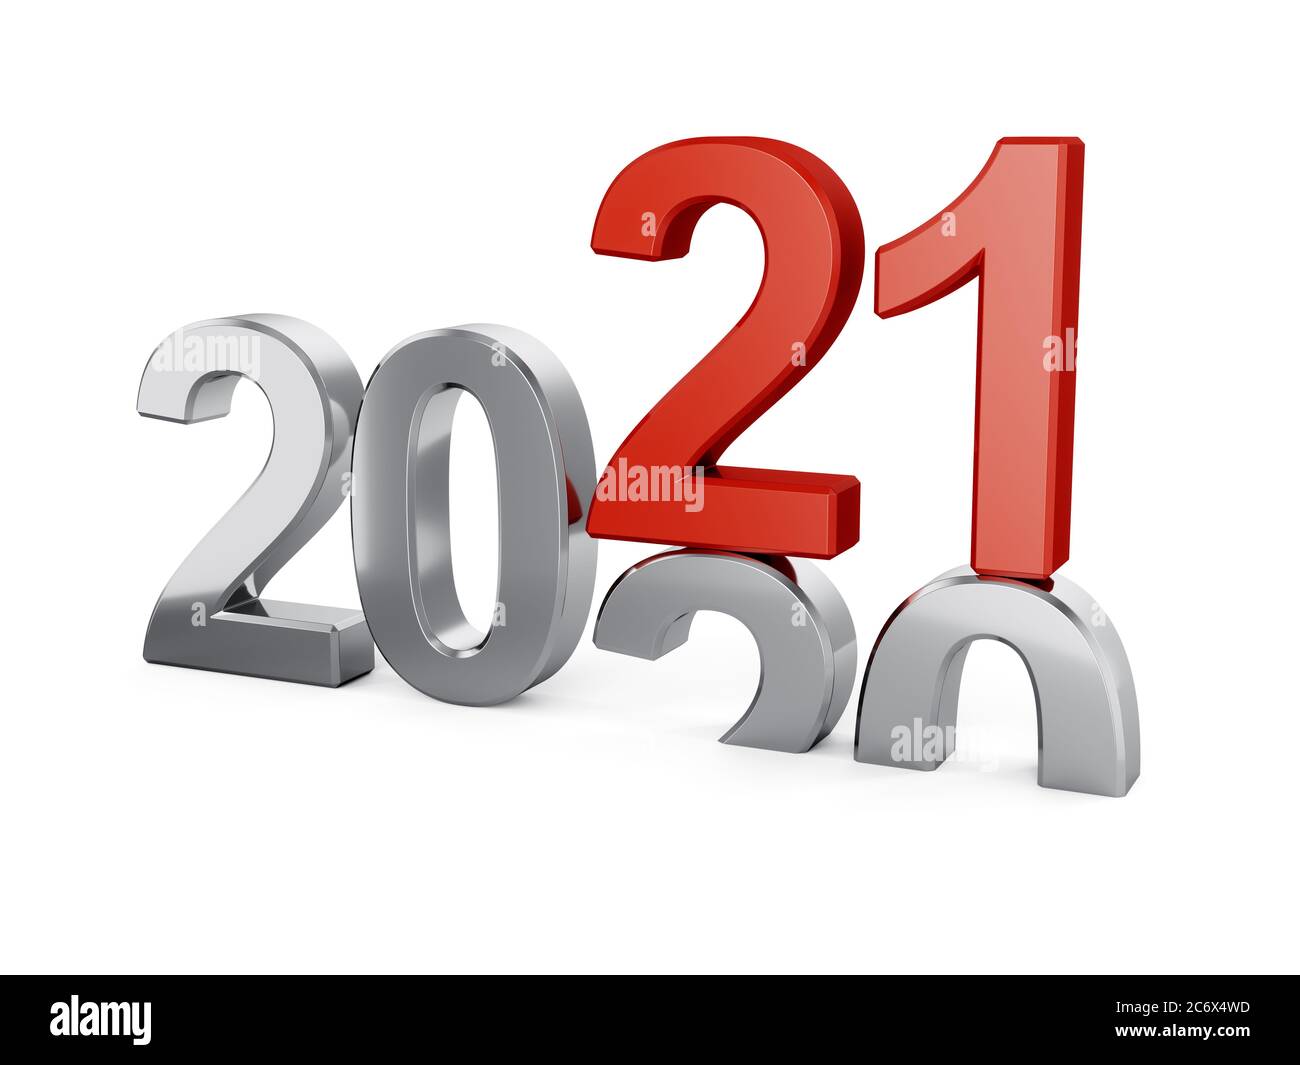 3d illustration of 2021 New Year concept isolated on white background Stock Photo